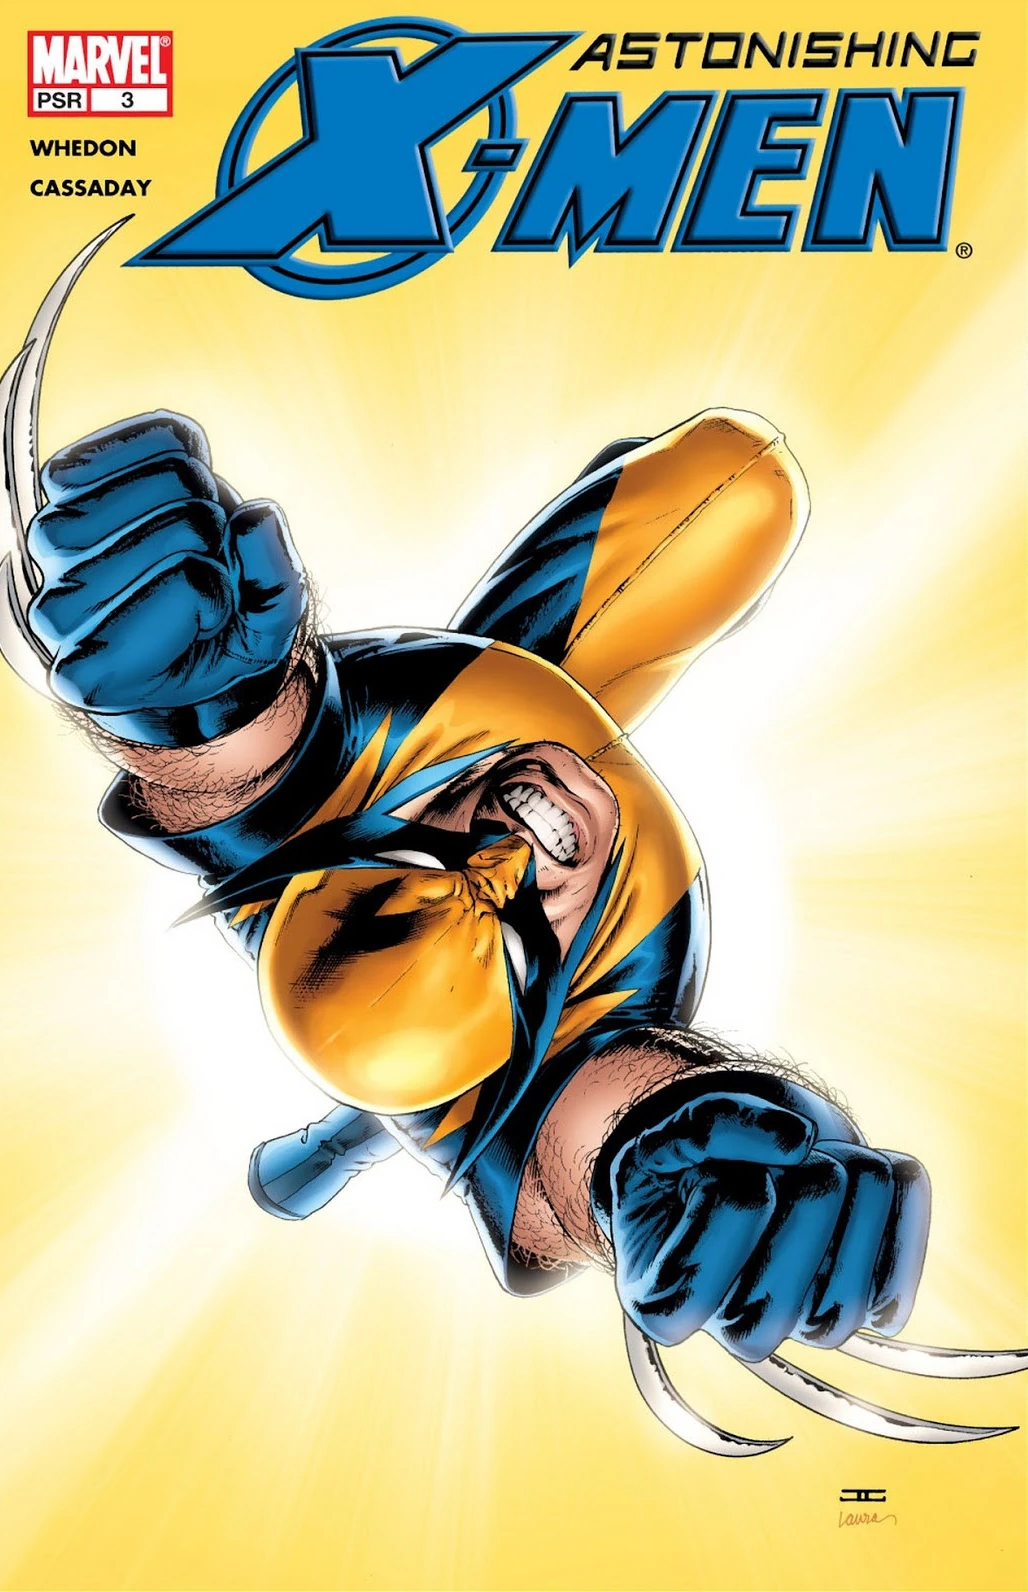 Wolverine lunges forward on John Cassaday and Laura Martin's cover to Astonishing X-Men Vol. 3 #3 "Gifted (Part 3) (2004), Marvel Comics